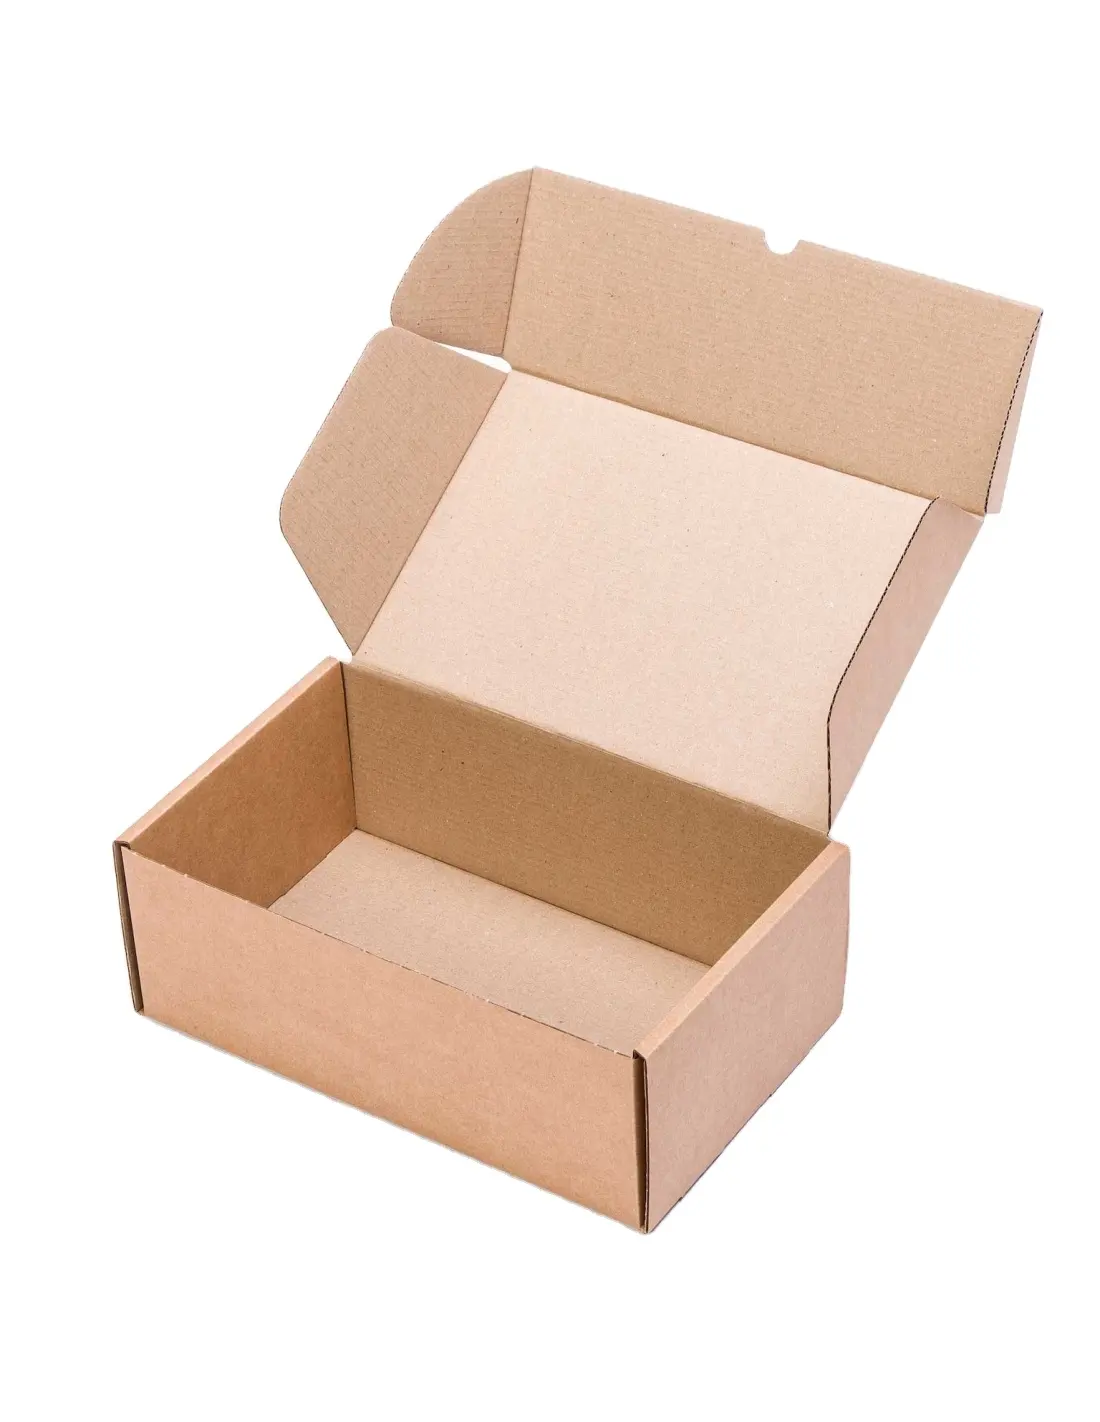 High Quality 34 5x21x12 5 Cms Strong Self Assembly Shoe Cardboard Boxes For Protection On Shipments And Postal Sendings